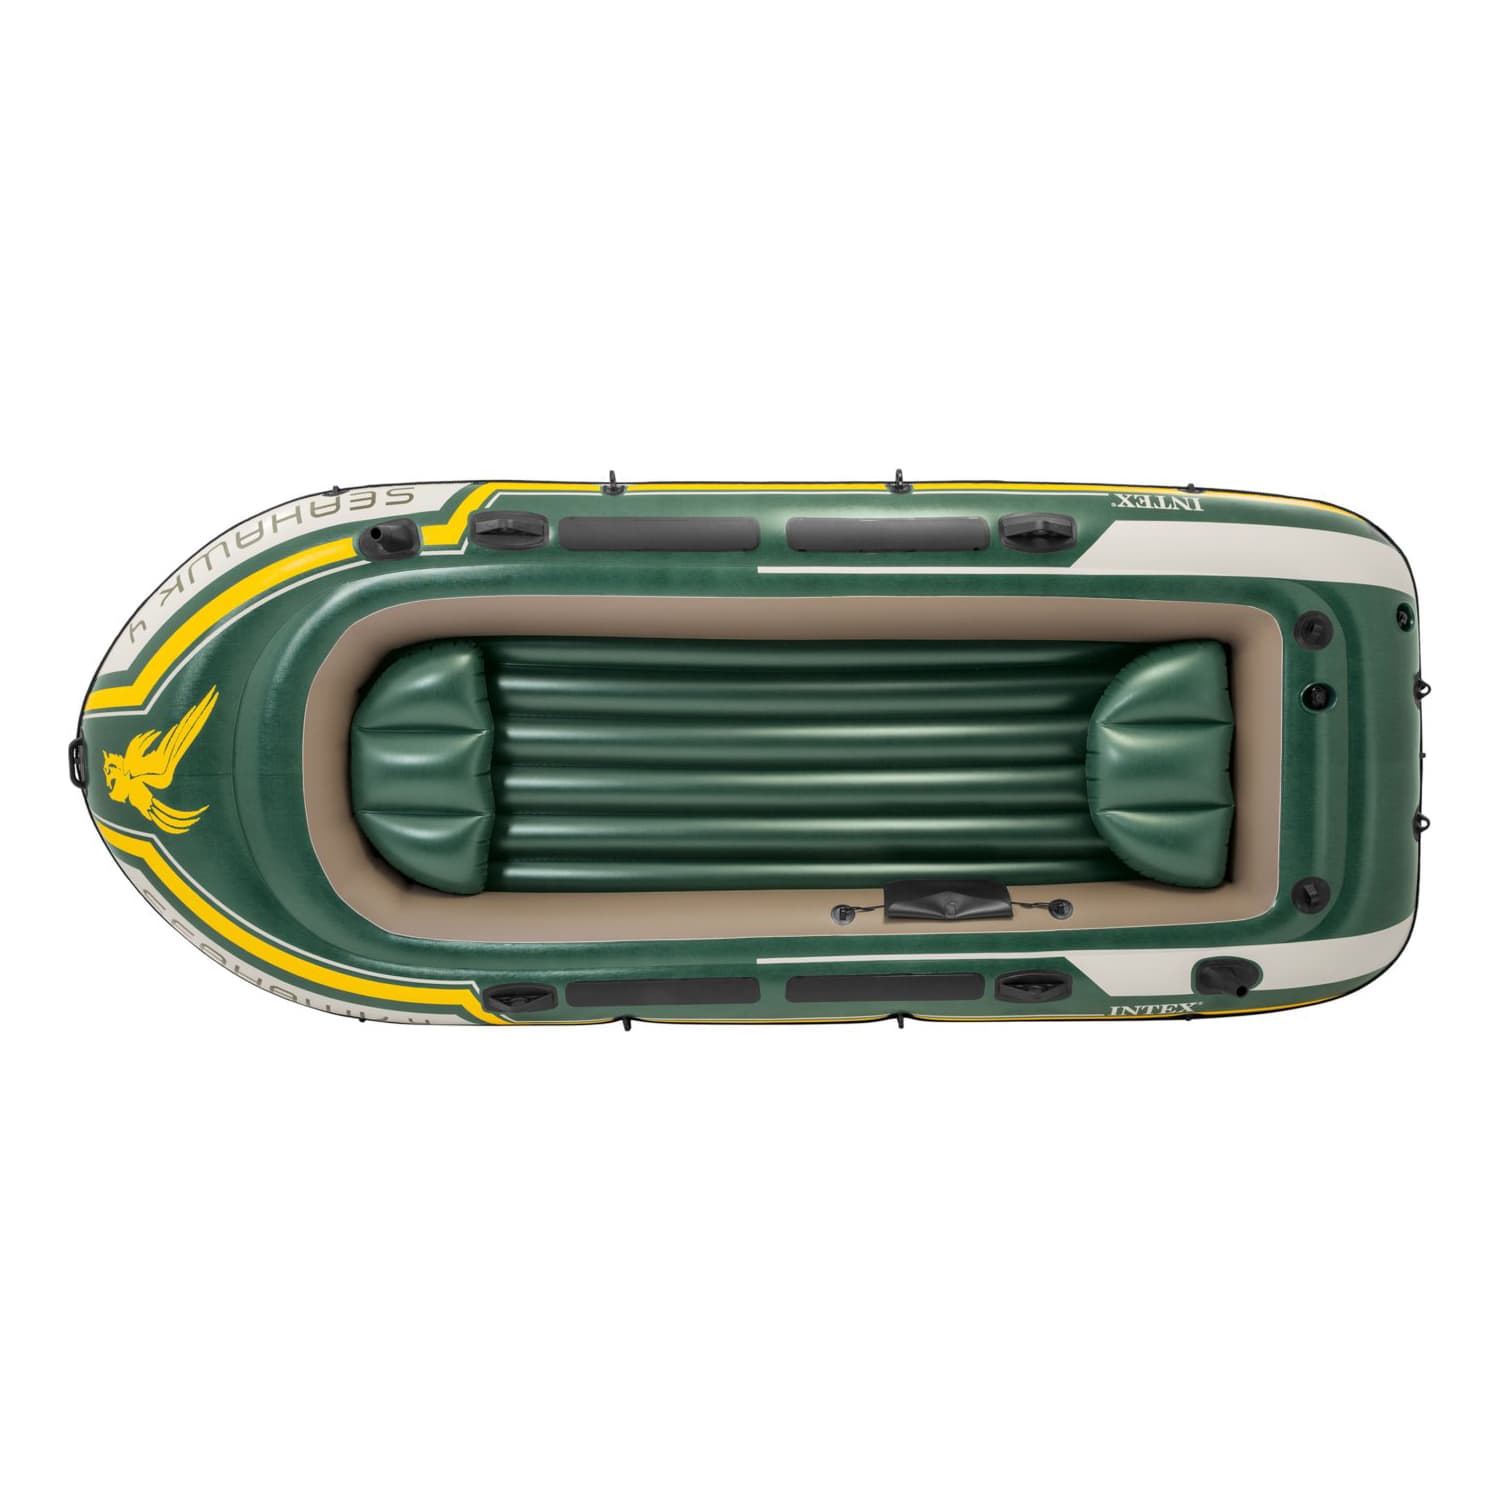 Intex Seahawk 4 Inflatable Boat Kit - Overhead View